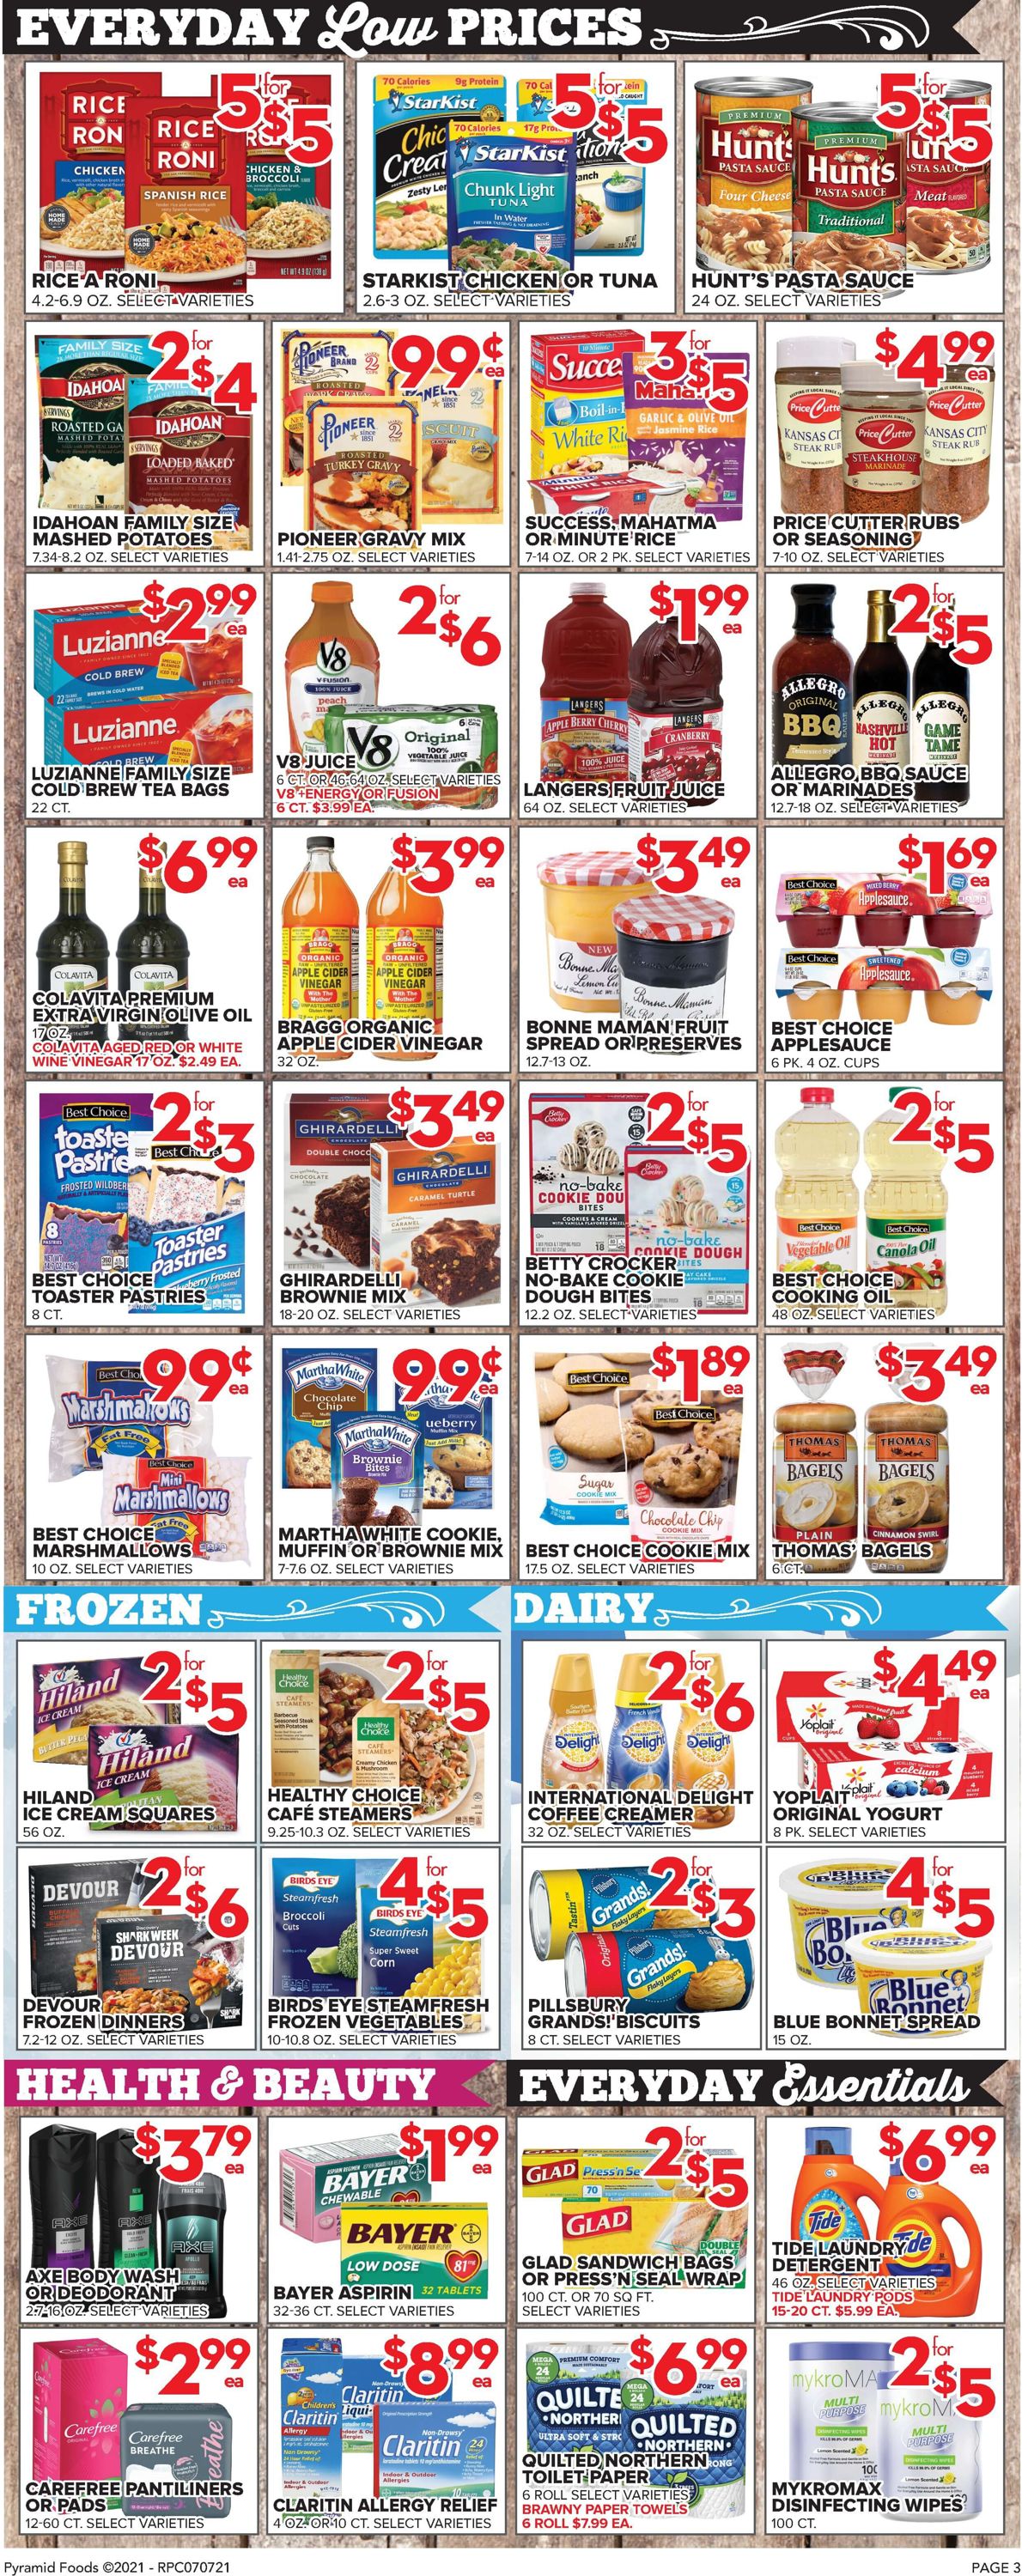 Price Cutter Weekly Ad Circular - valid 07/07-07/13/2021 (Page 3)